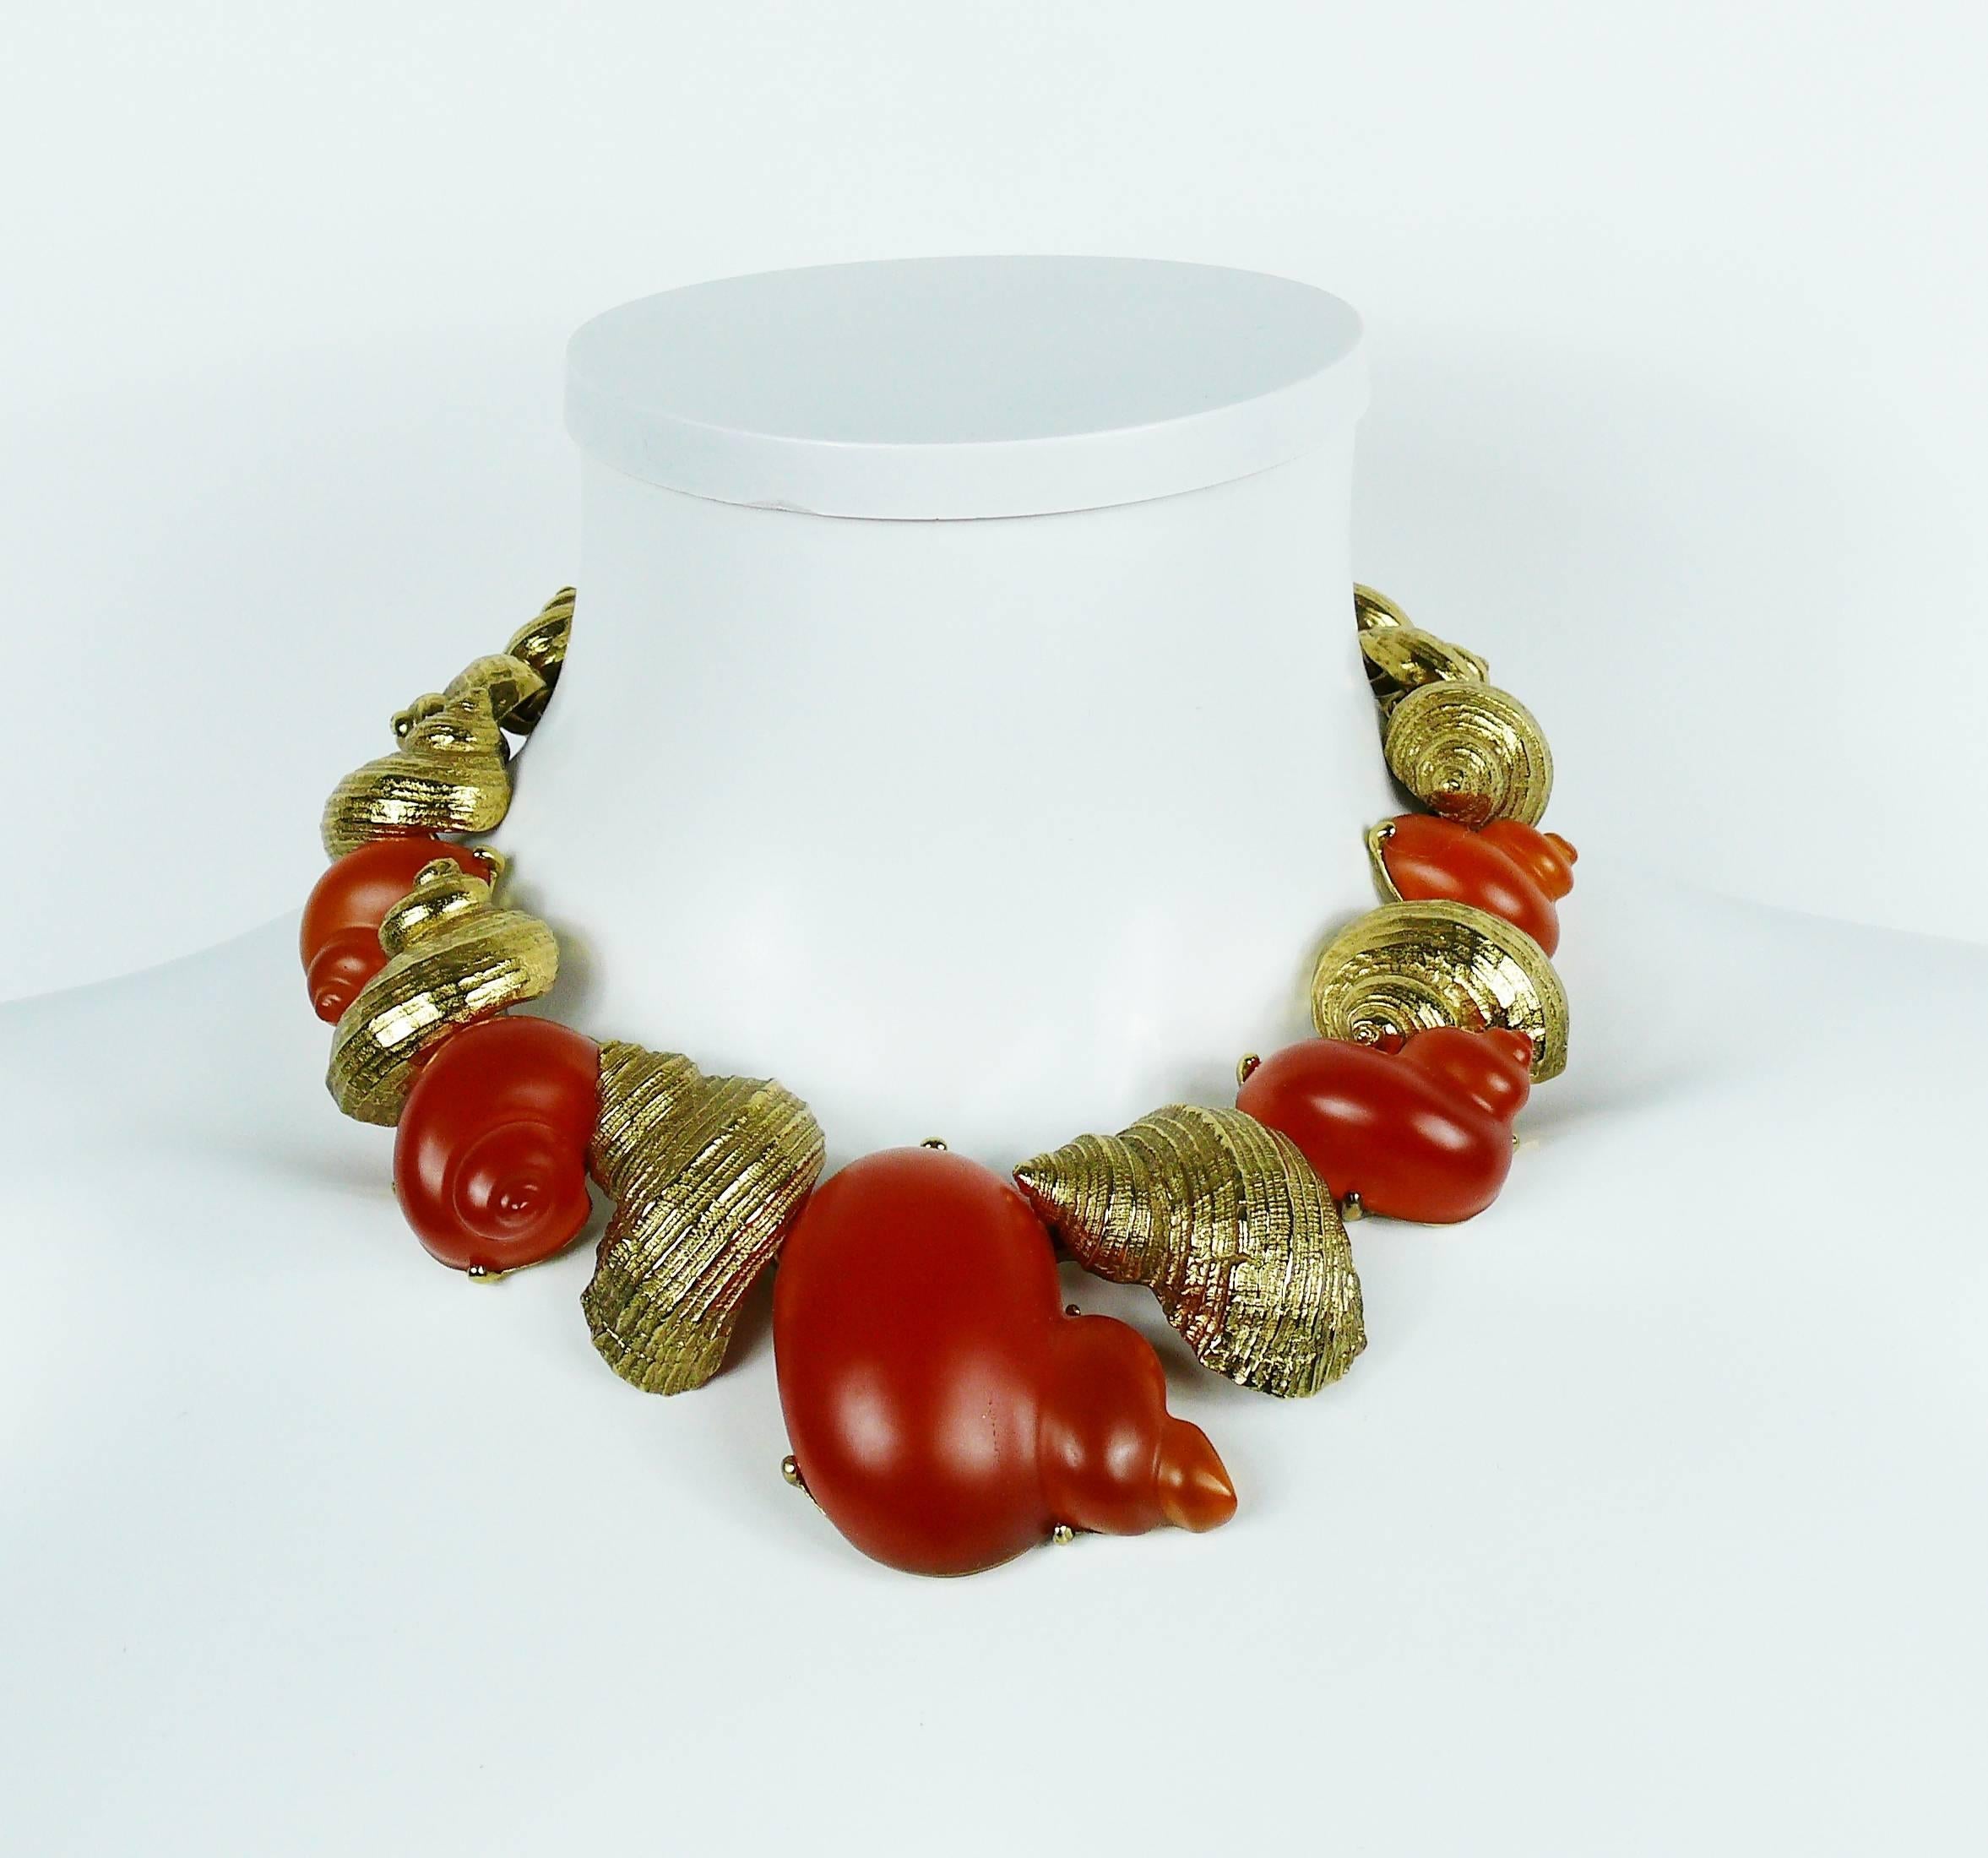 CHRISTIAN DIOR vintage rare shell necklace created by the French parurier ROBERT GOOSSENS for the launch of the fragrance DUNE in 1987.

This necklace features articulated and graduated textured gold toned and orange resin shells.

Embossed